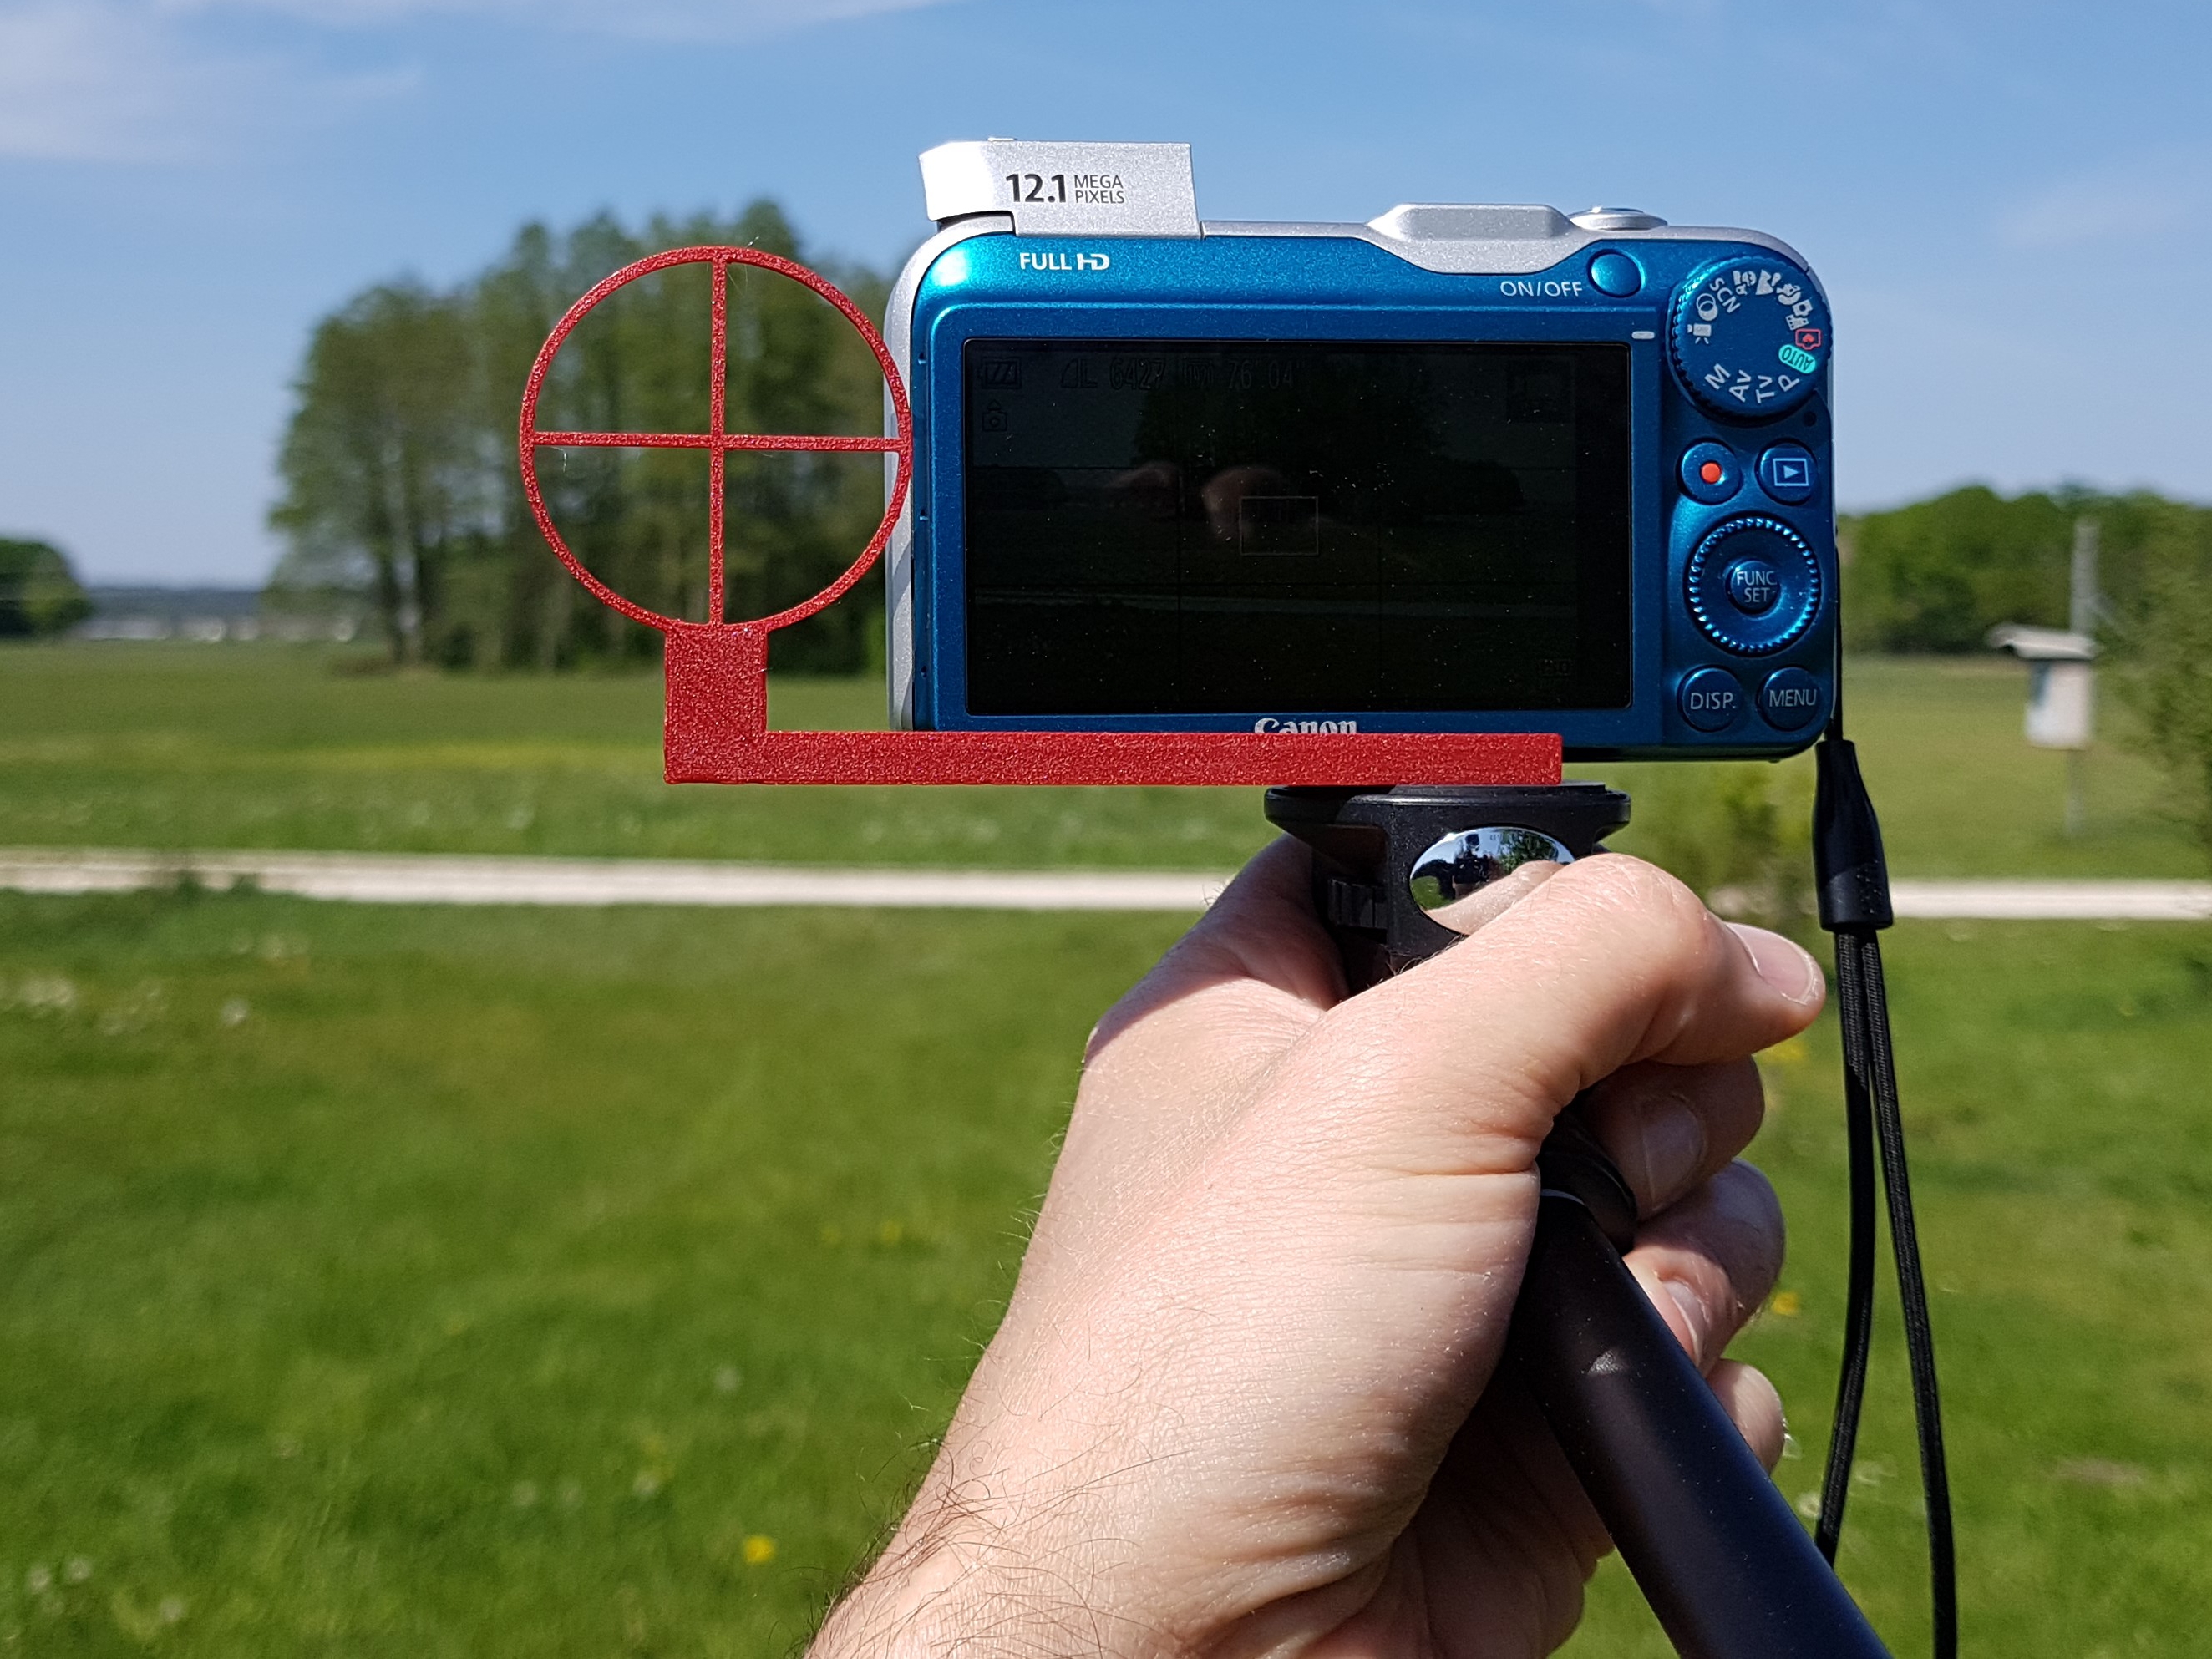 Crosshair viewfinder for filming fast moving objects